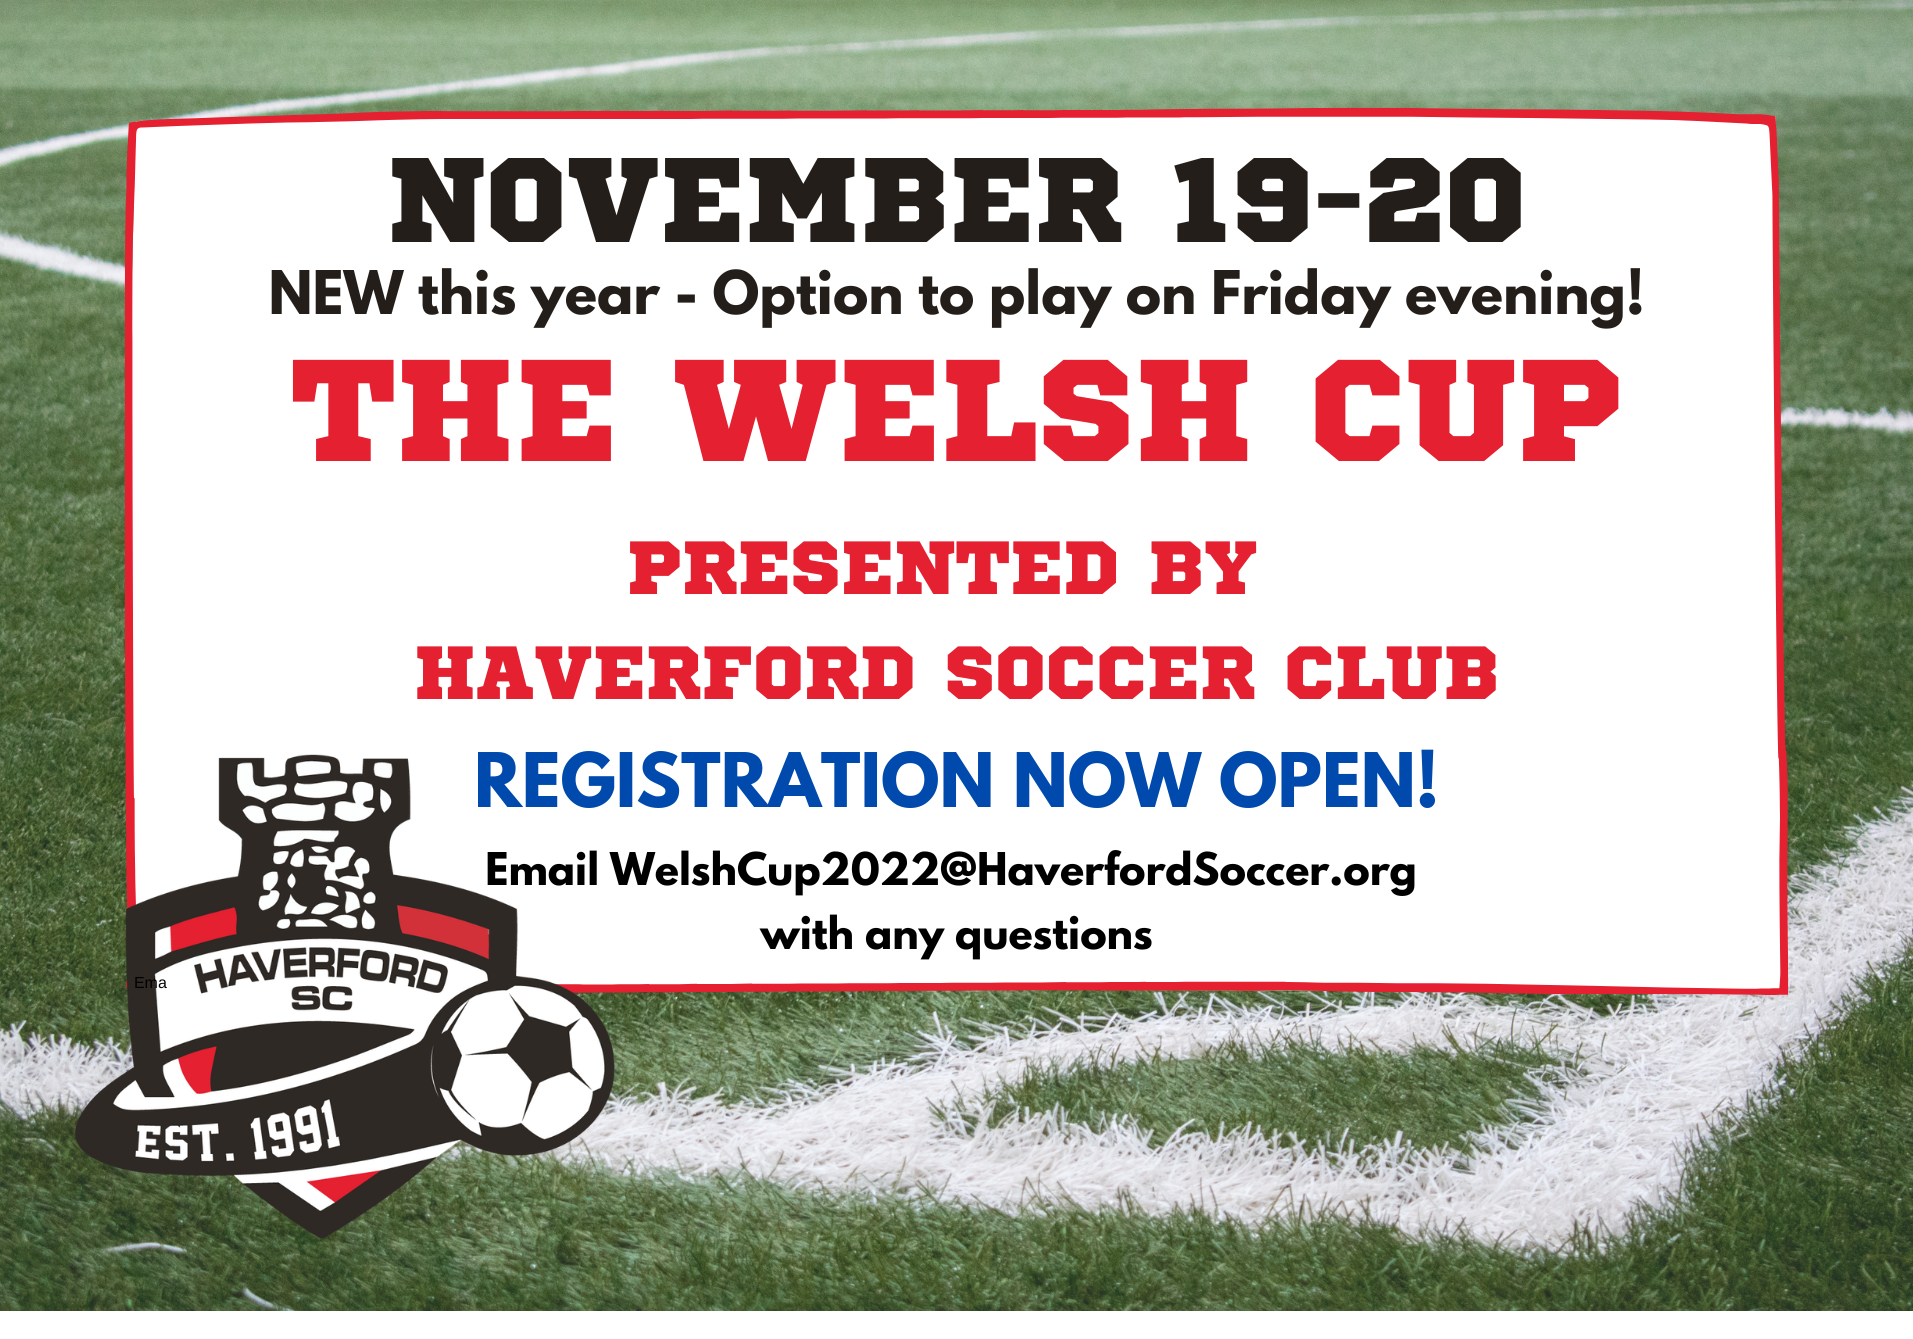 Haverford Soccer Club Welsh Cup- Registration is OPEN